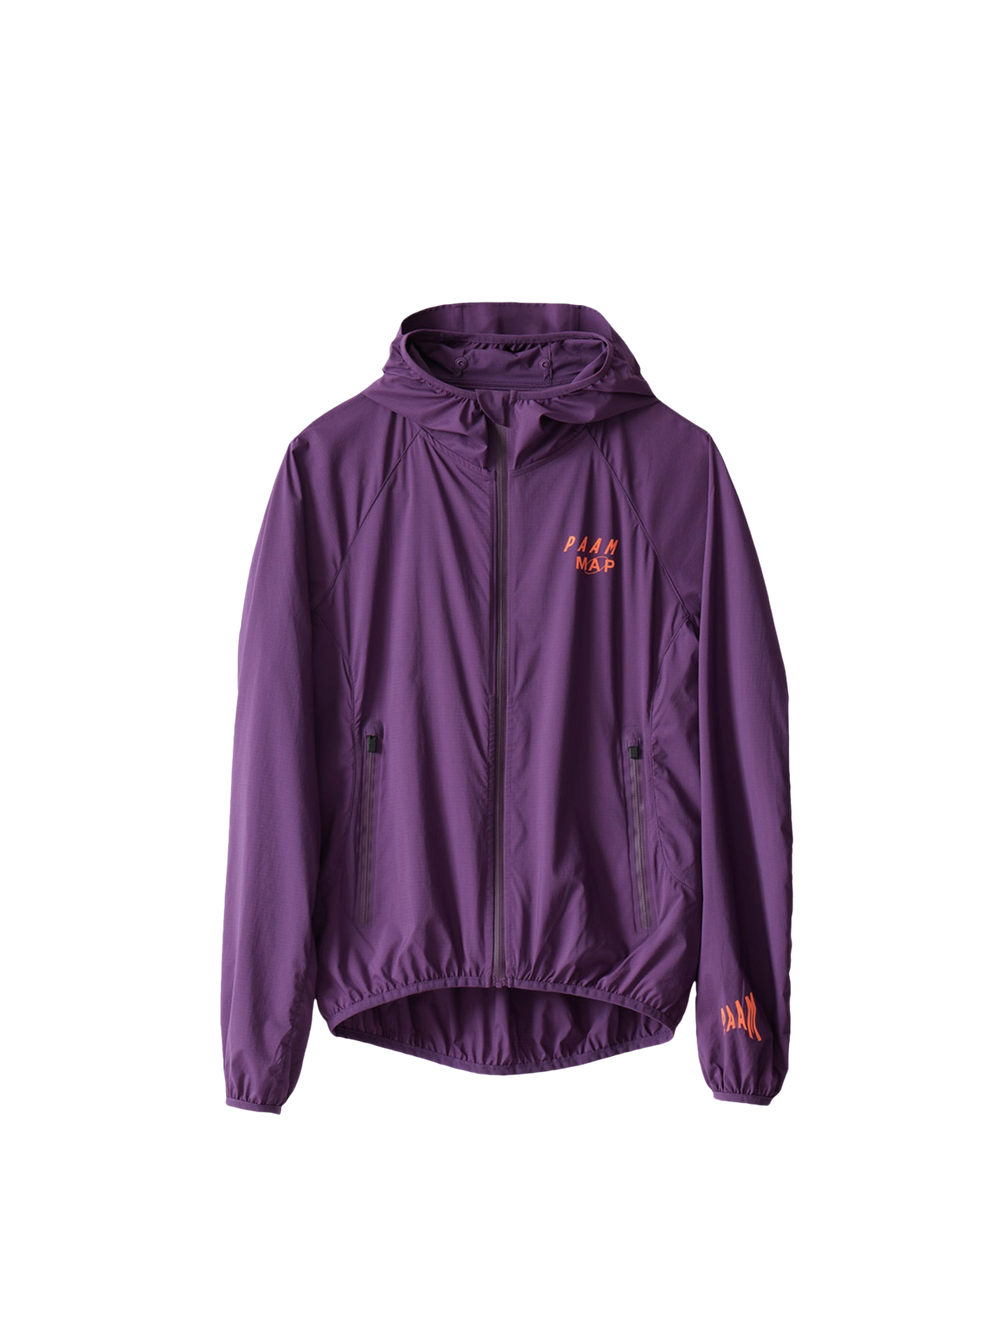 Product Image for Women's MAAP X PAM Jacket